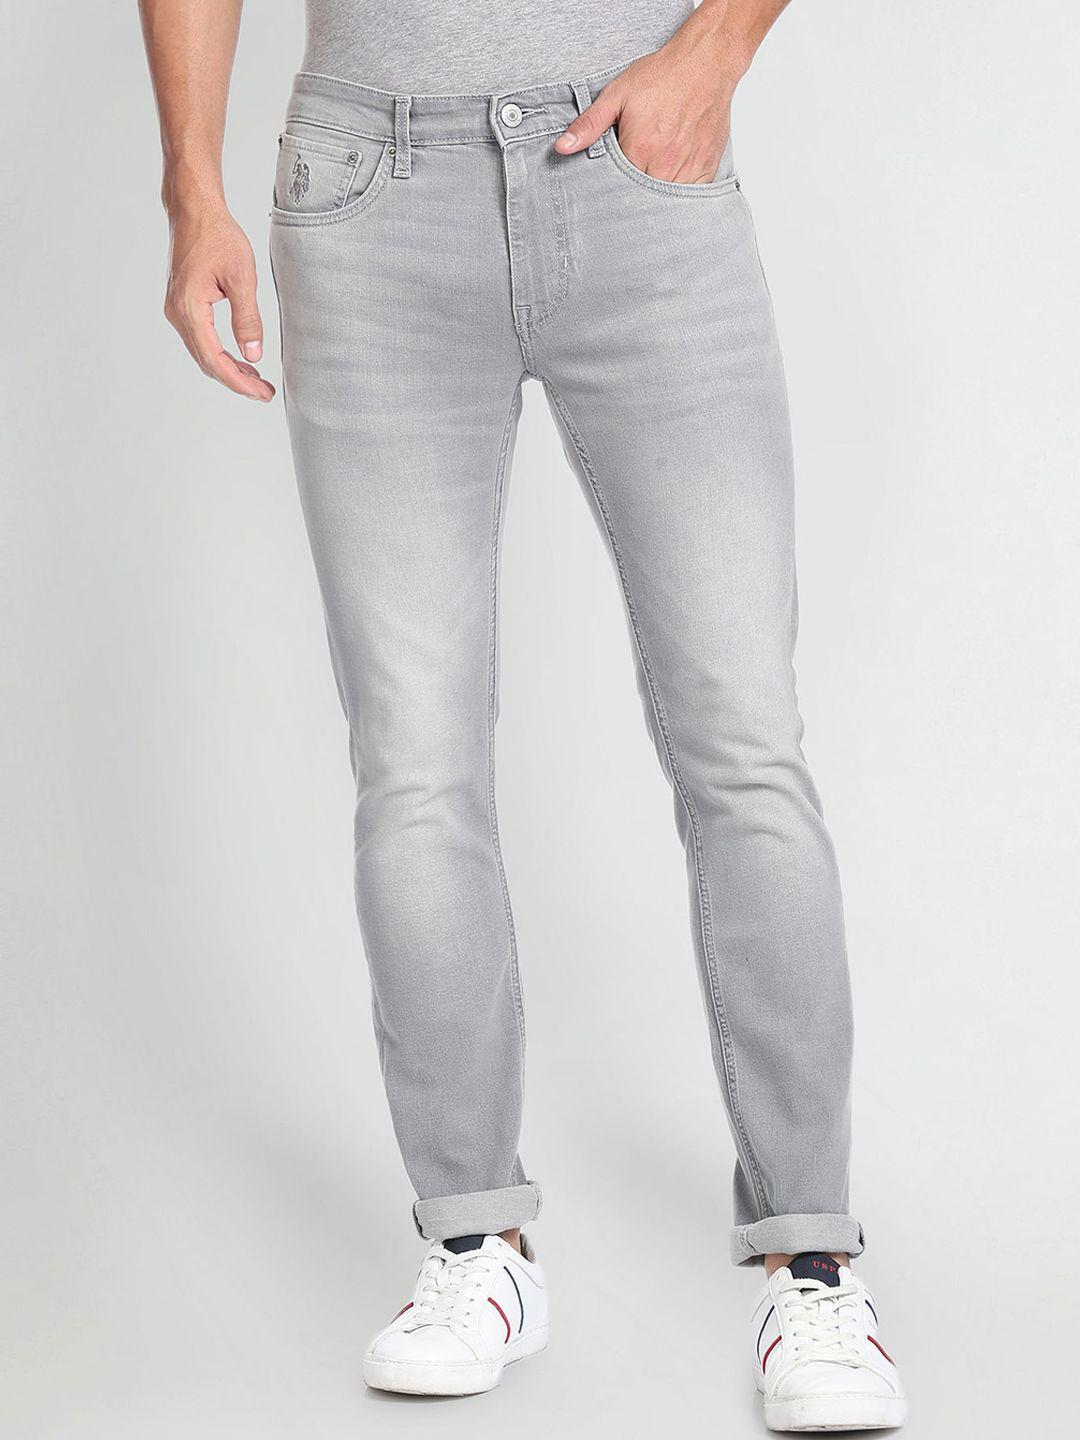 u.s.-polo-assn.-denim-co.-men-mid-rise-skinny-fit-clean-look-heavy-fade-stretchable-jeans